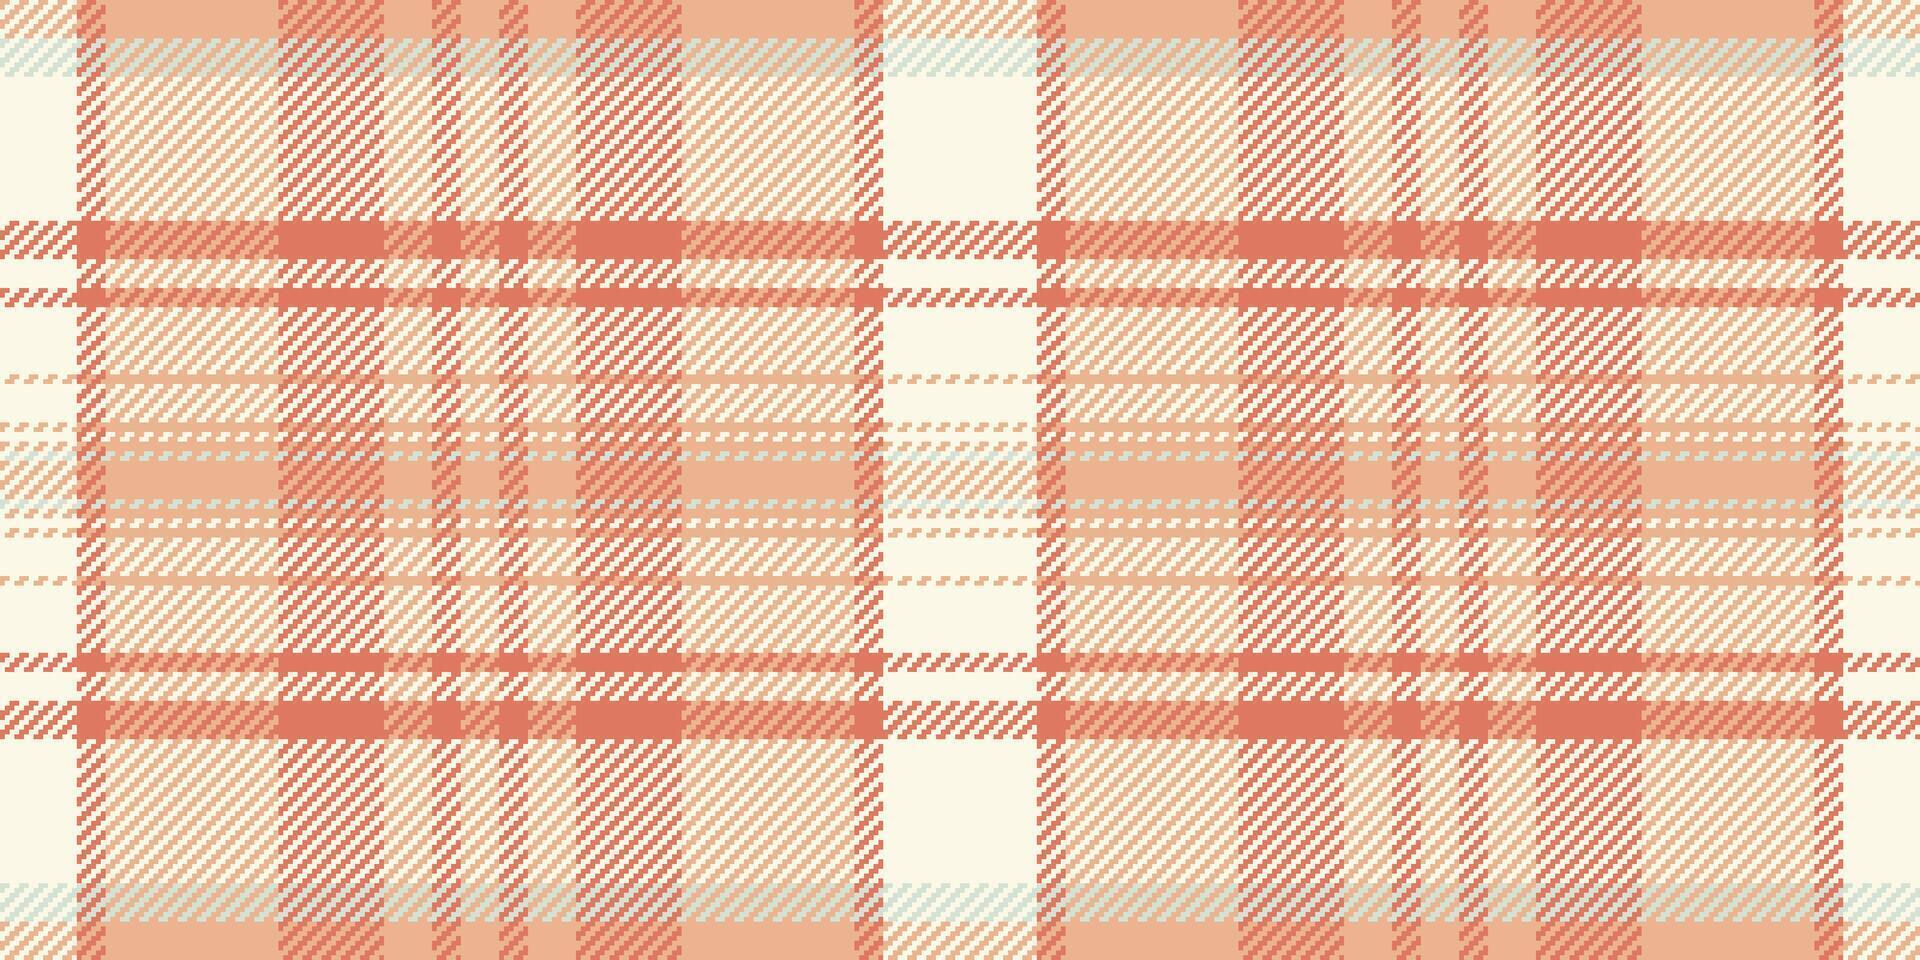 Thin seamless background pattern, order vector plaid check. Asymmetric tartan textile fabric texture in old lace and orange colors.